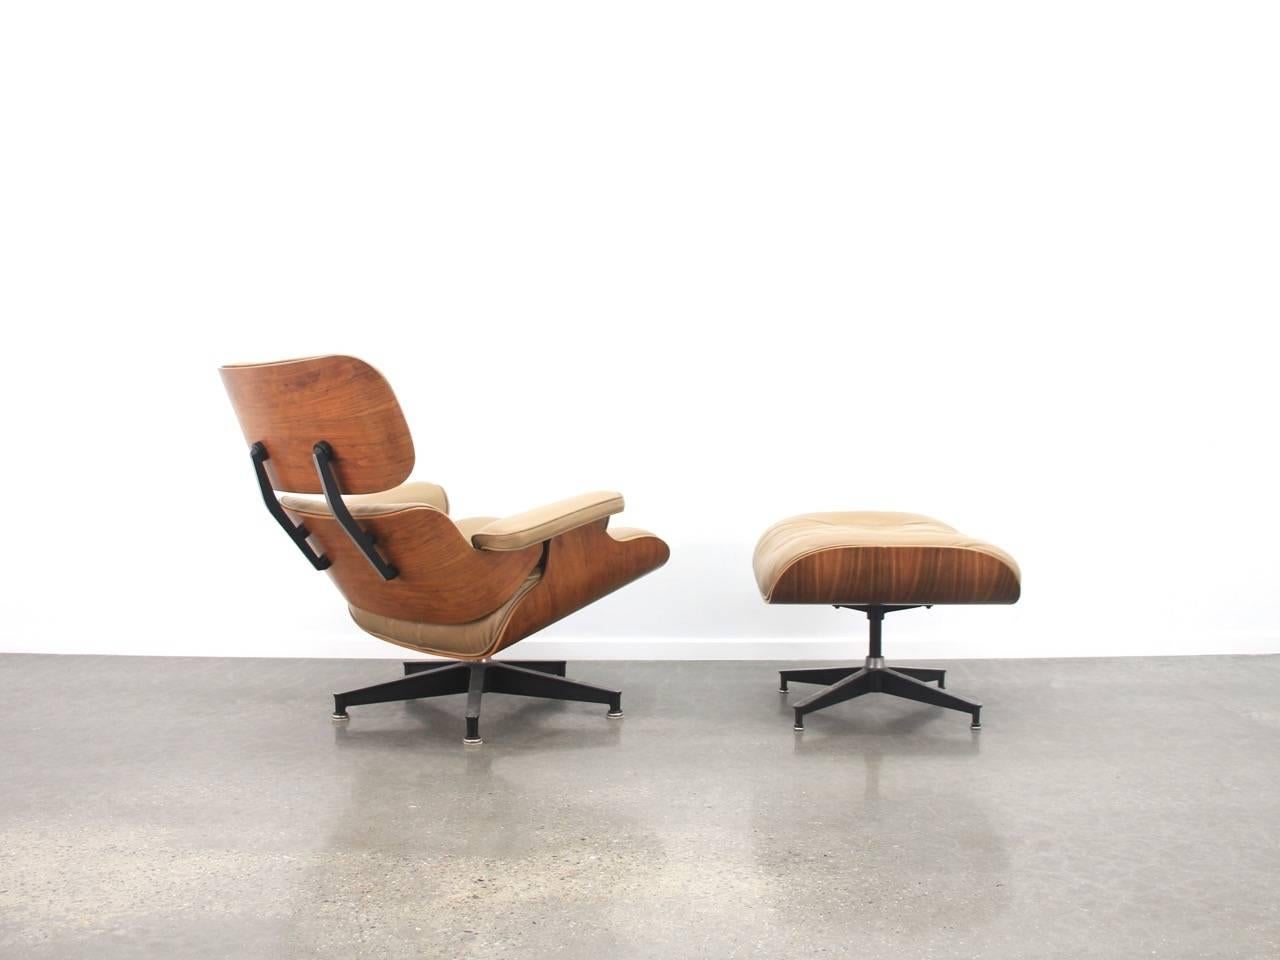 The well-known Eames lounge chair and ottoman for Herman Miller, USA, 1970s
A great combination of original caramel / mokka colored leather in pristine condition
and Rio rosewood.